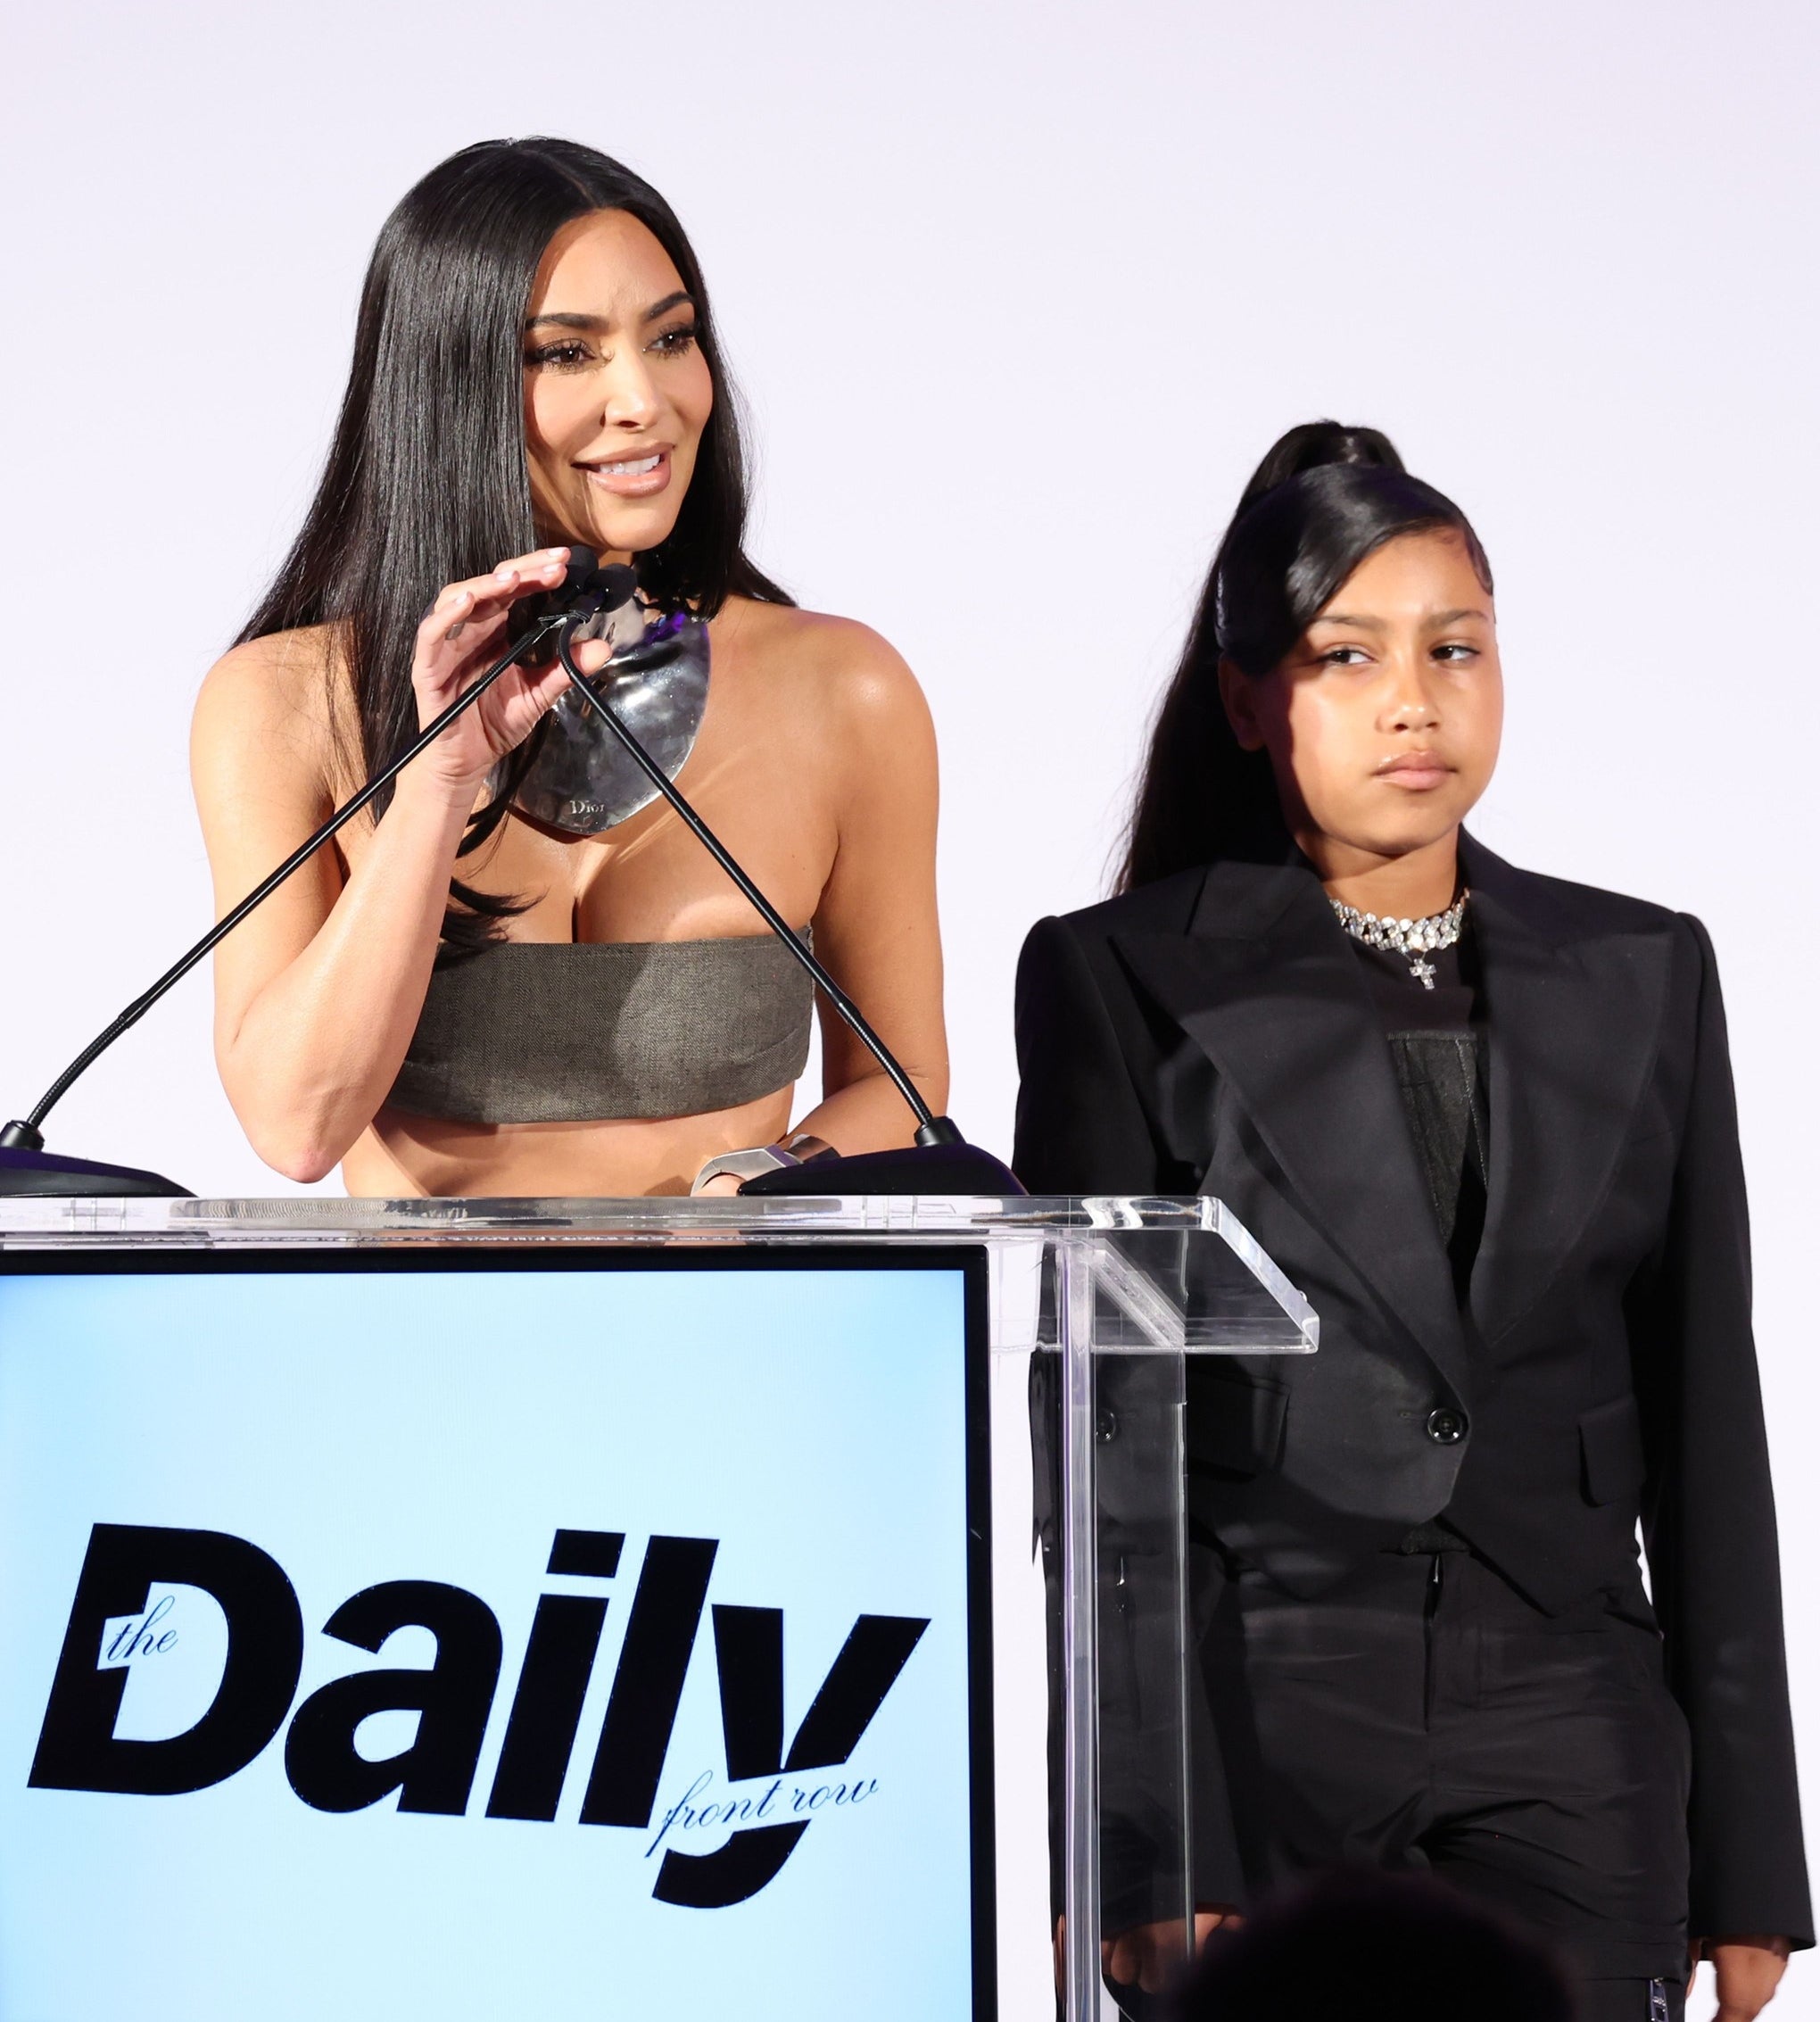 north standing next to kim as she speaks at a podium